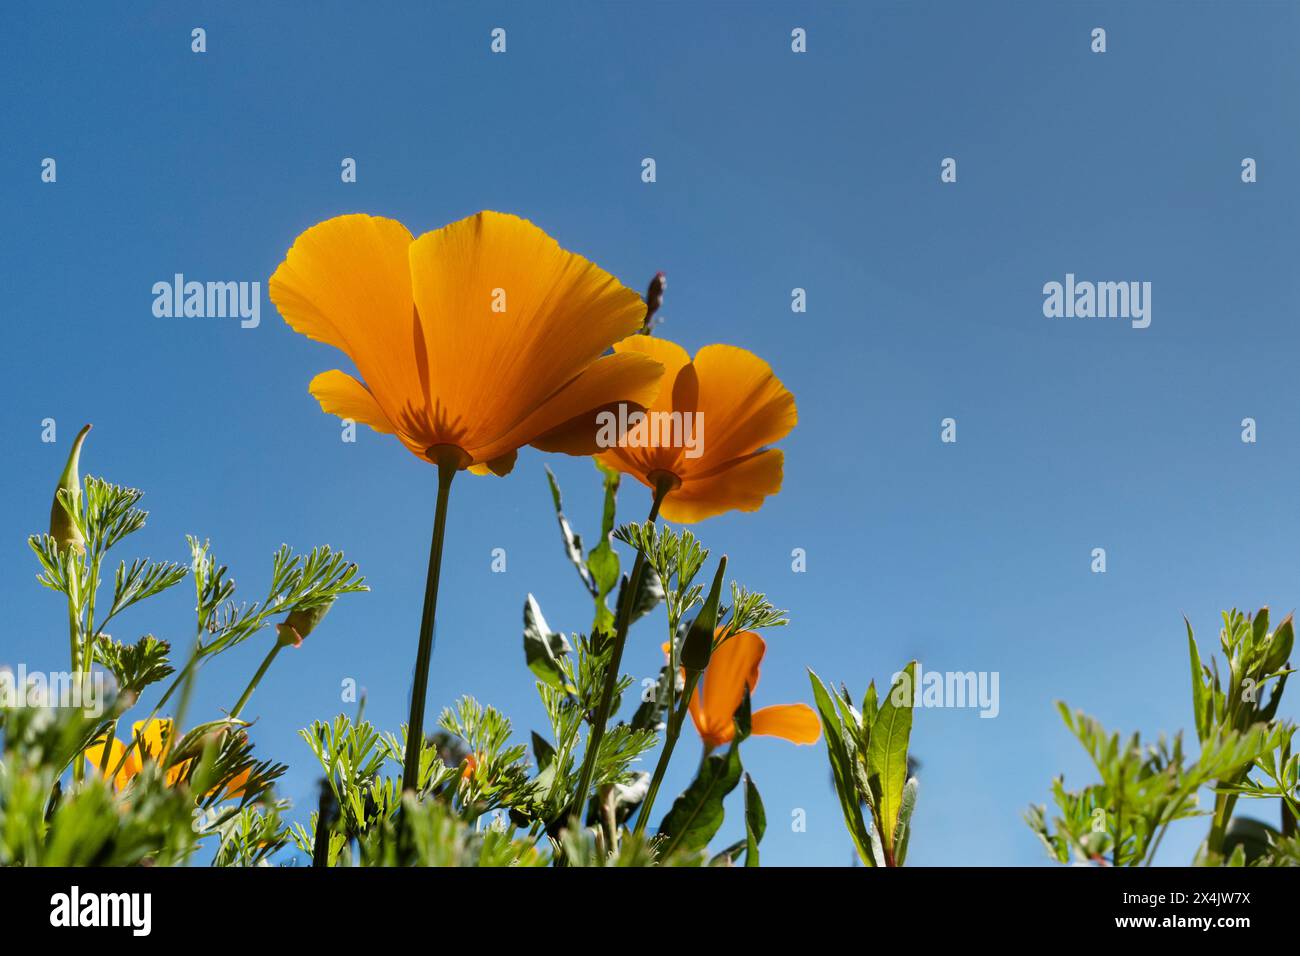 Looking up at poppies, a loww angle view of bright orange California poppies Stock Photo